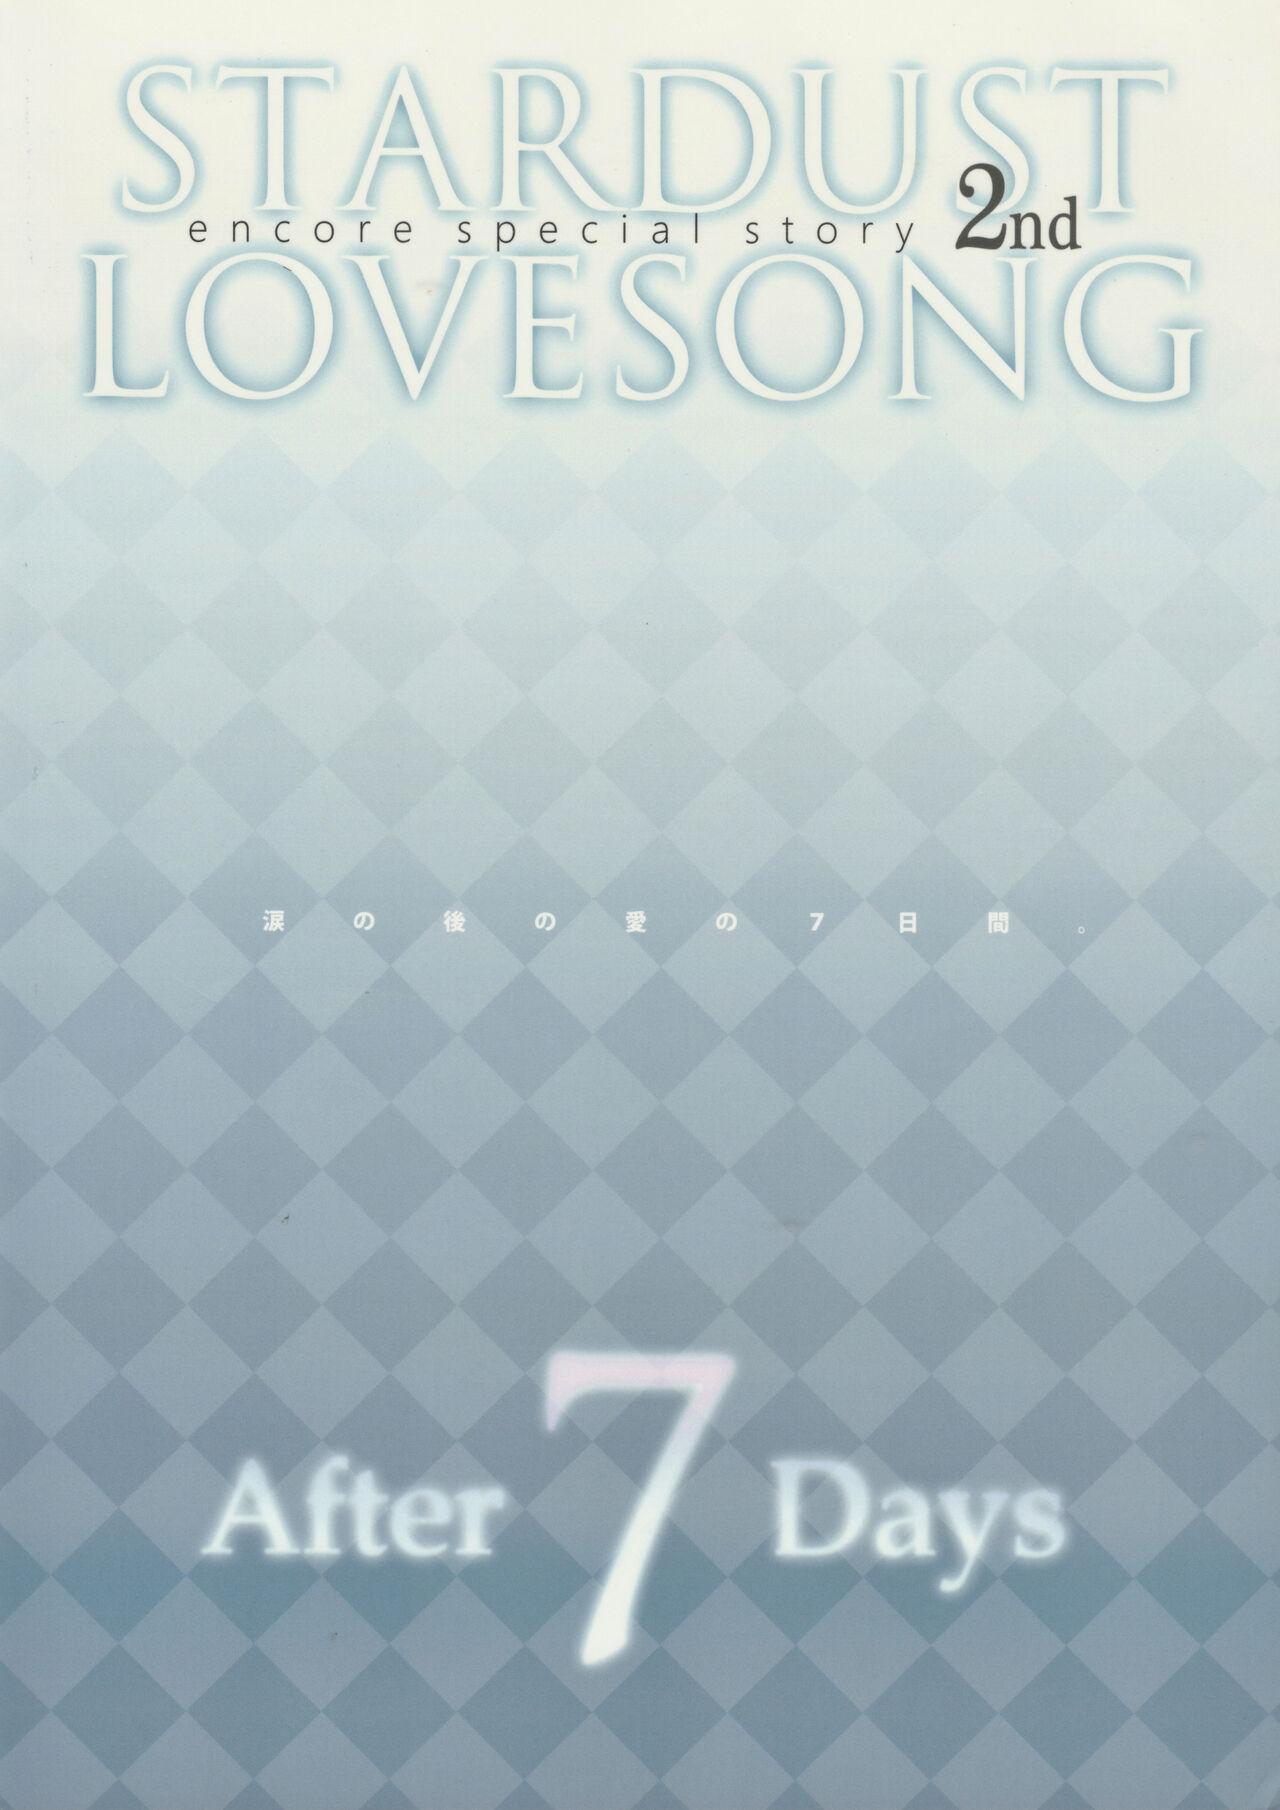 STARDUST LOVESONG encore special story 2nd After 7 Days 46